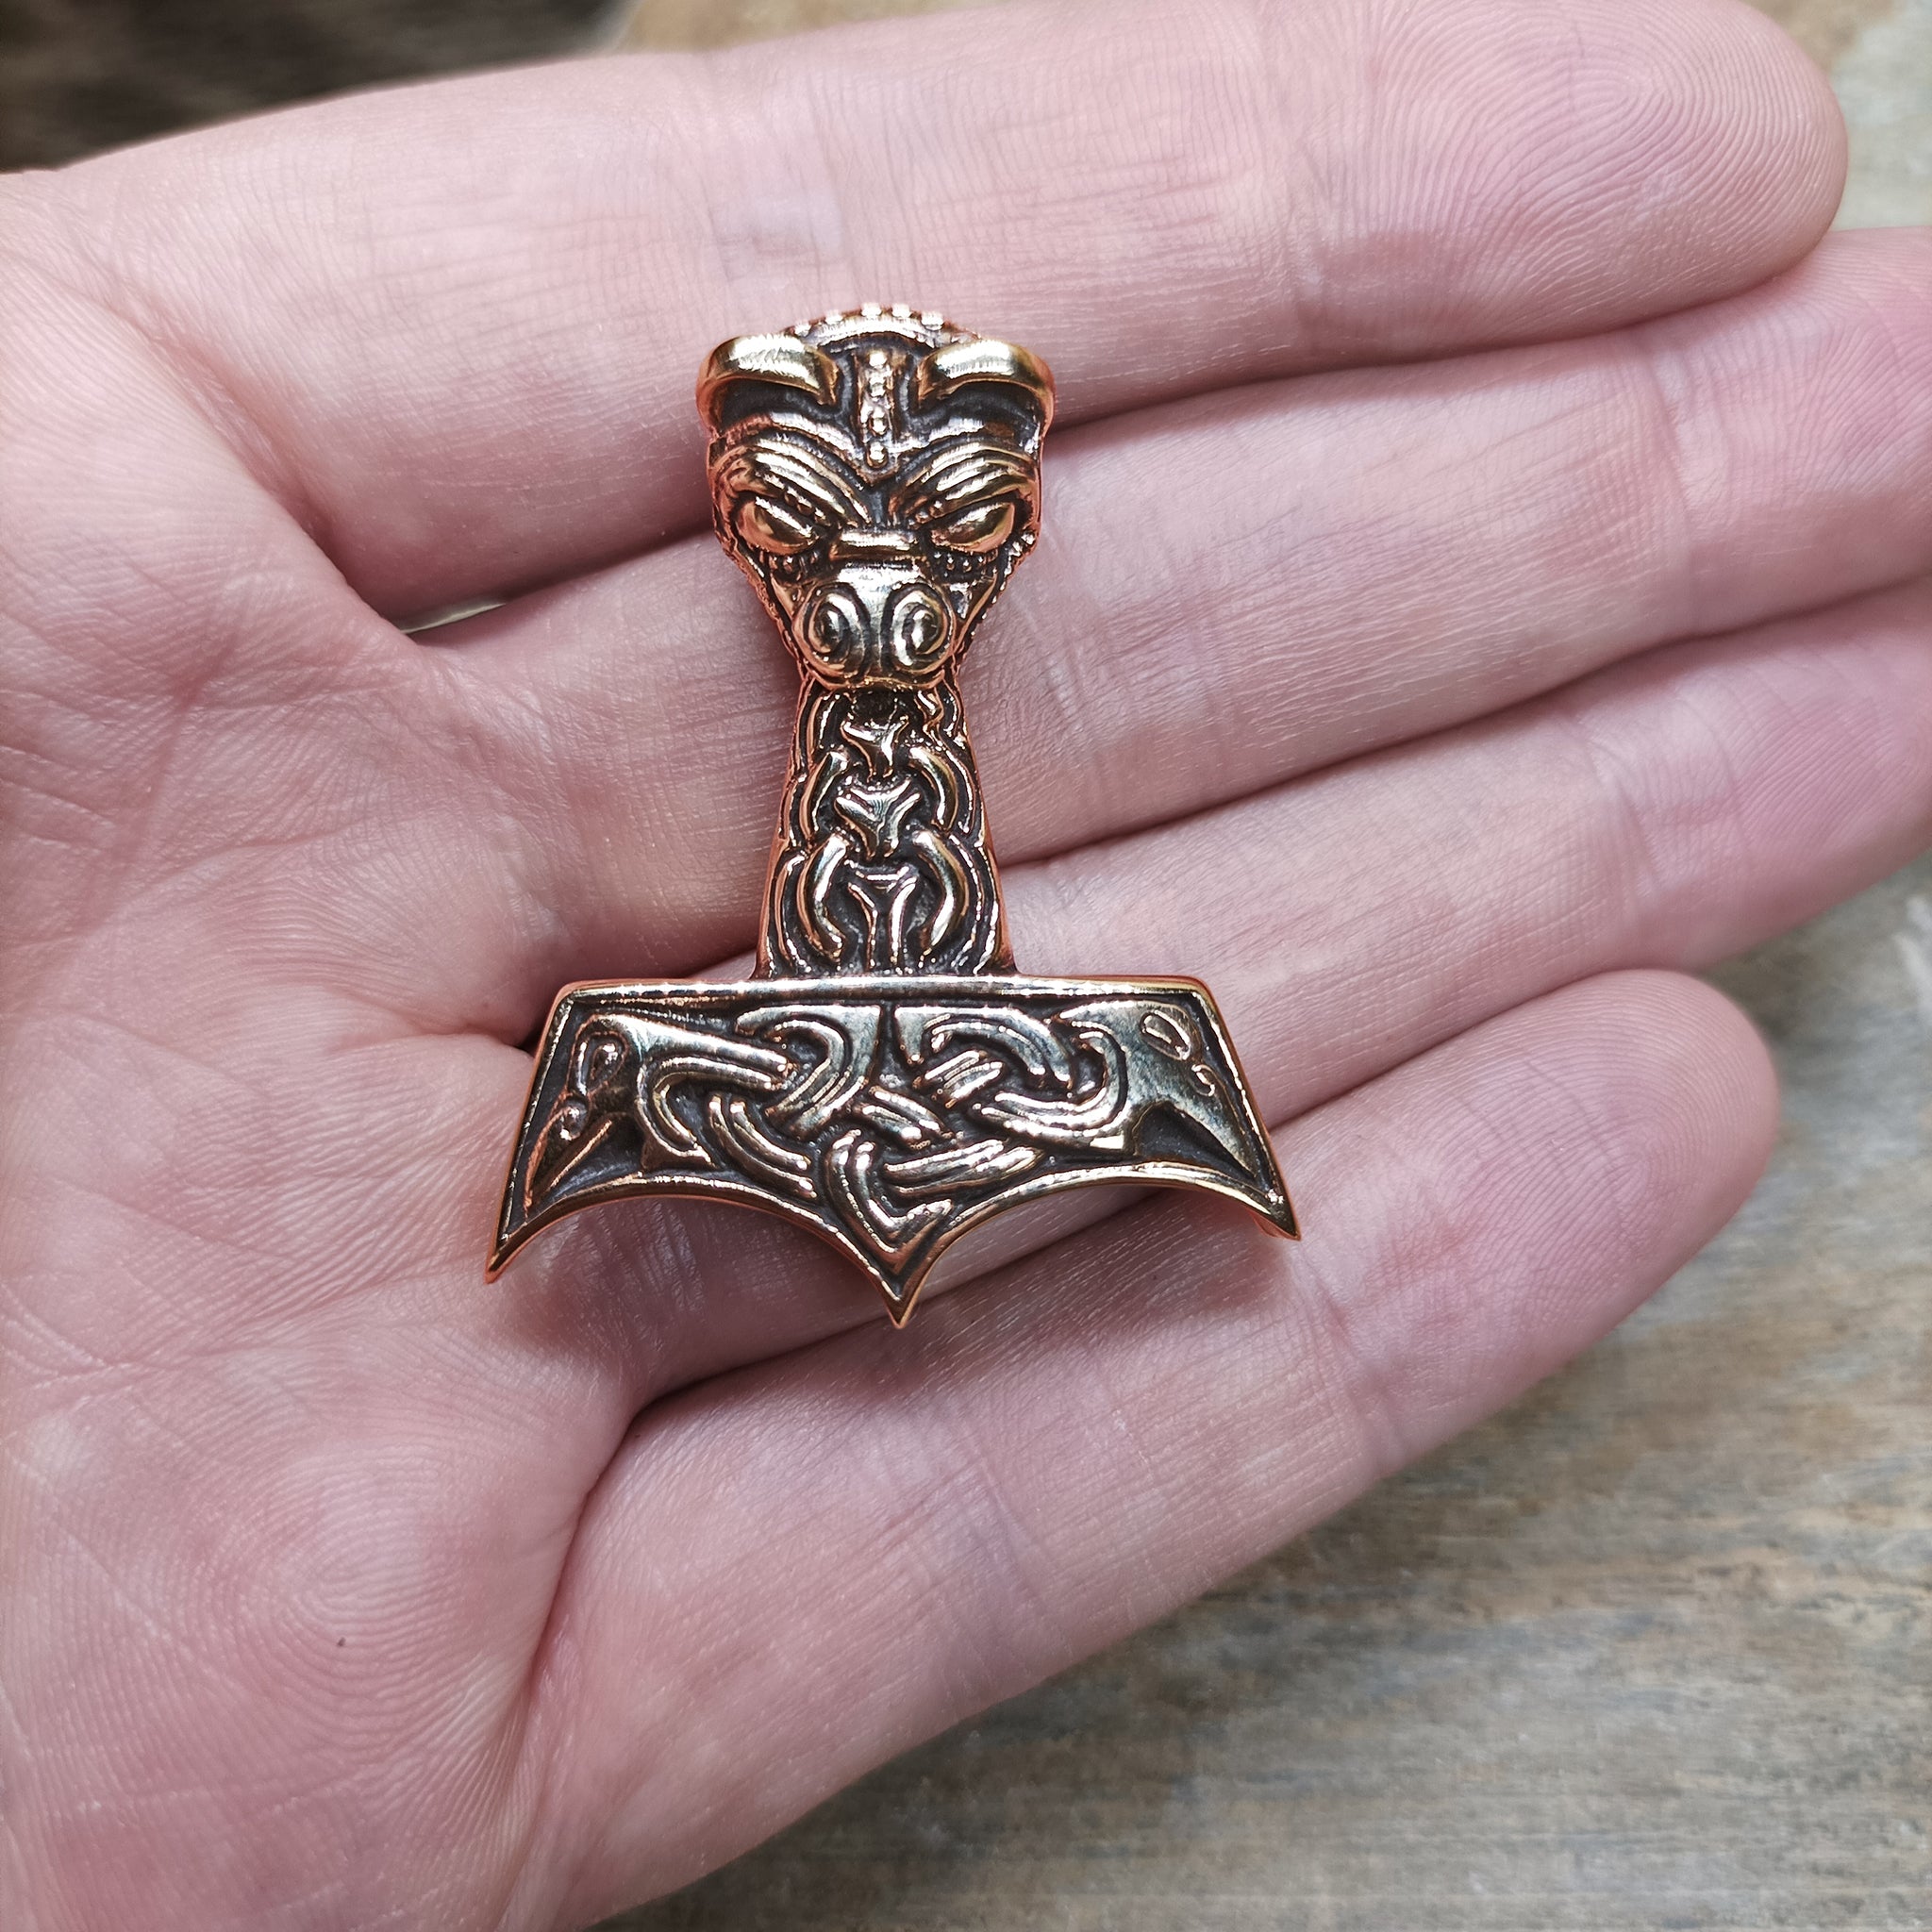 Bronze Large And Ferocious Thors Hammer Pendant on Hand